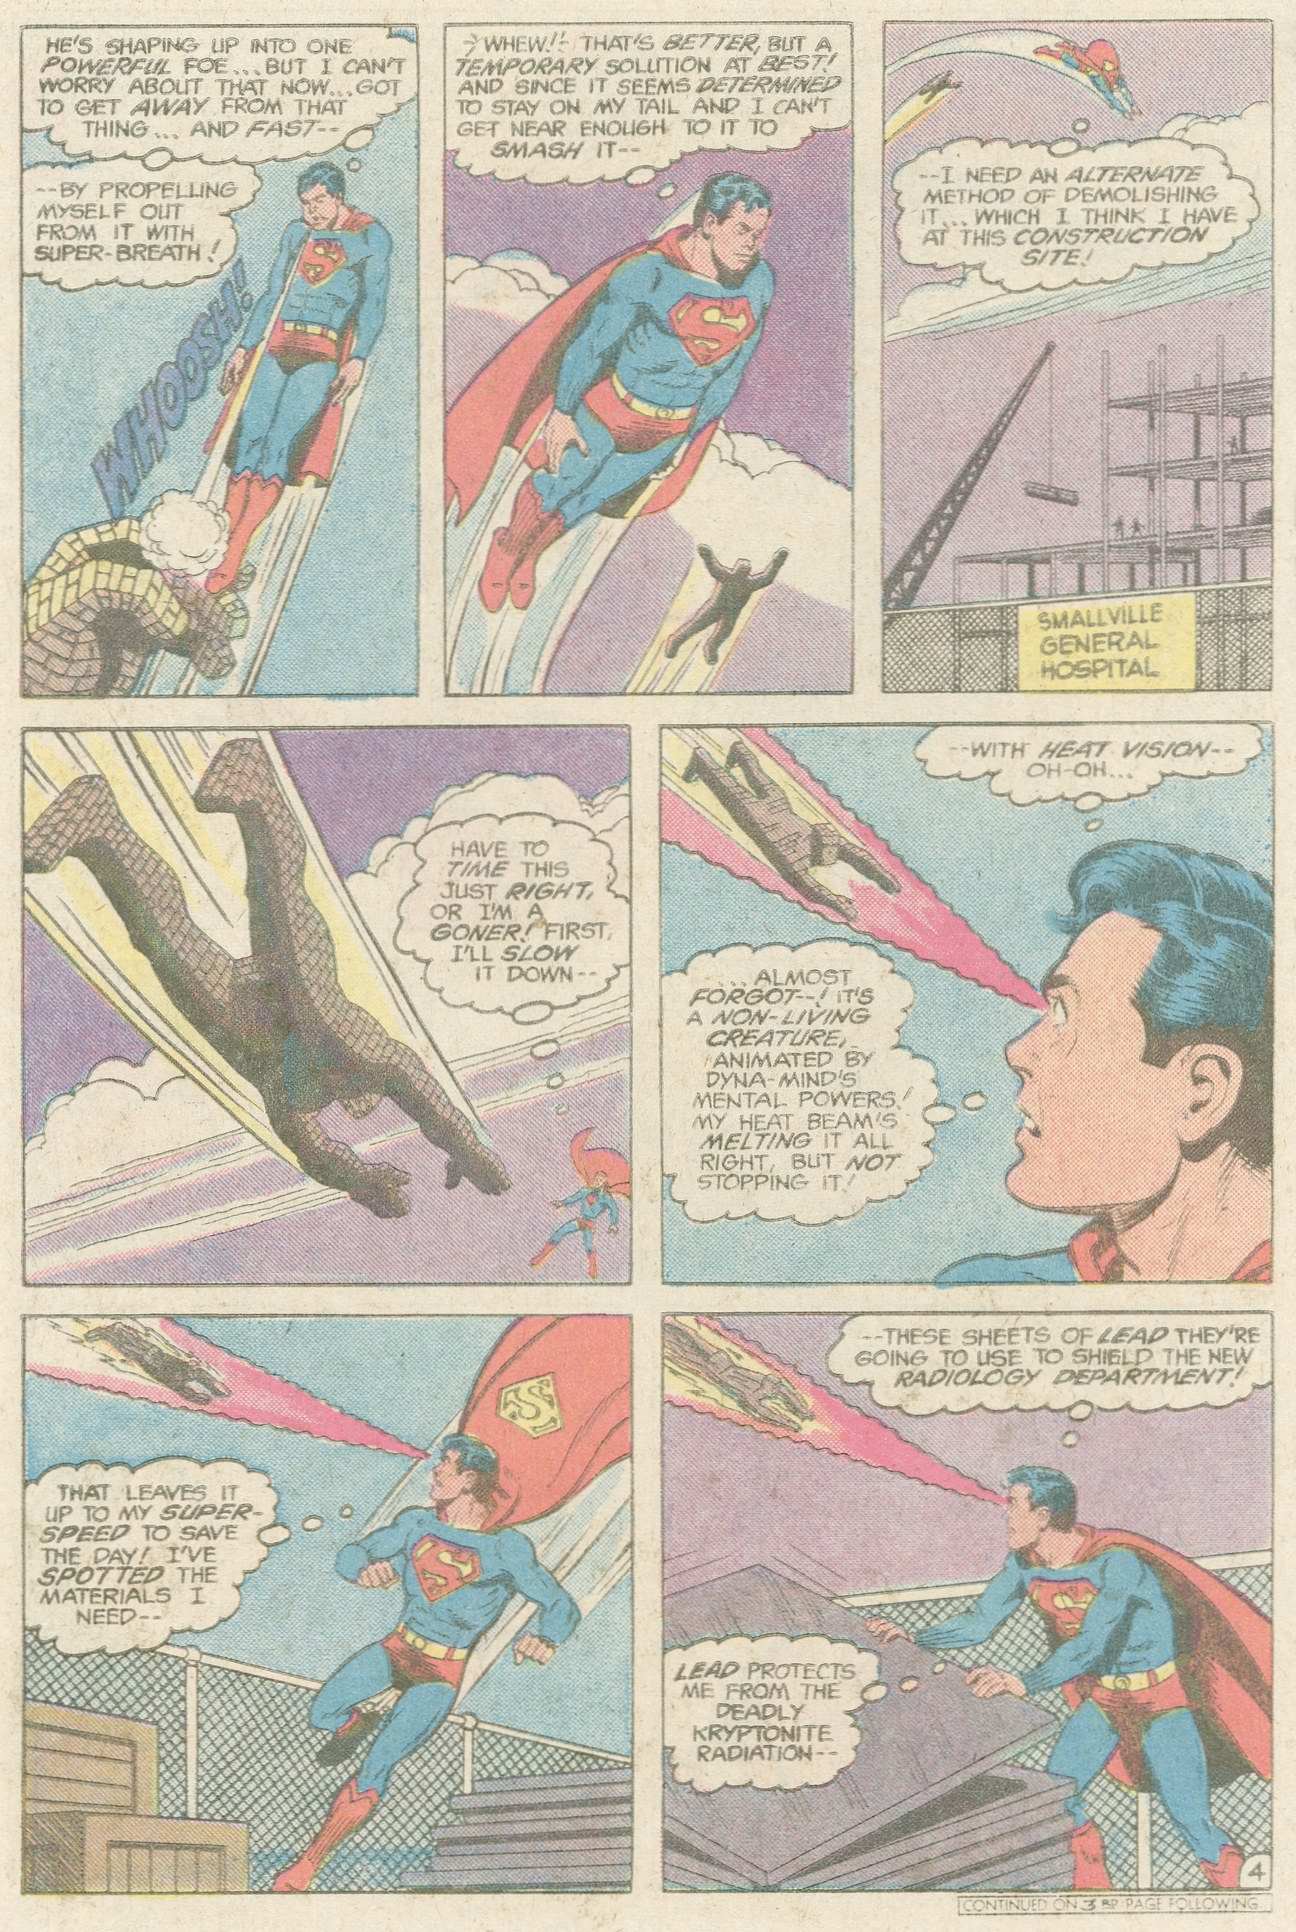 The New Adventures of Superboy 43 Page 4